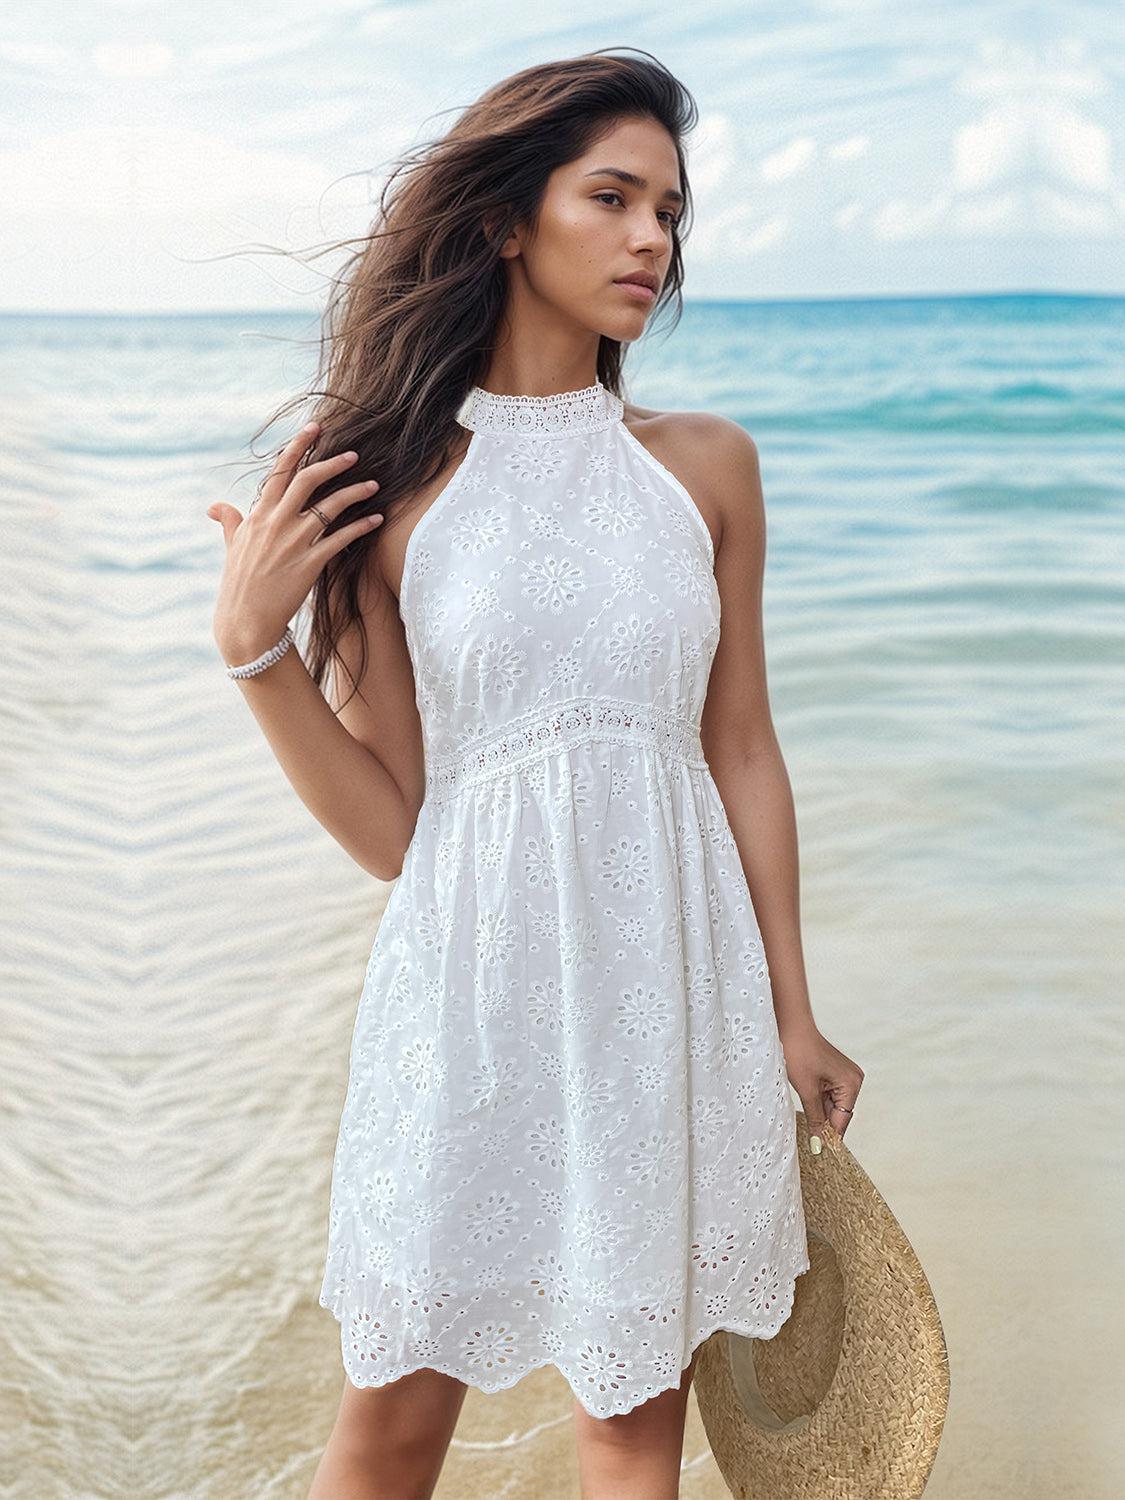 a woman in a white dress on the beach